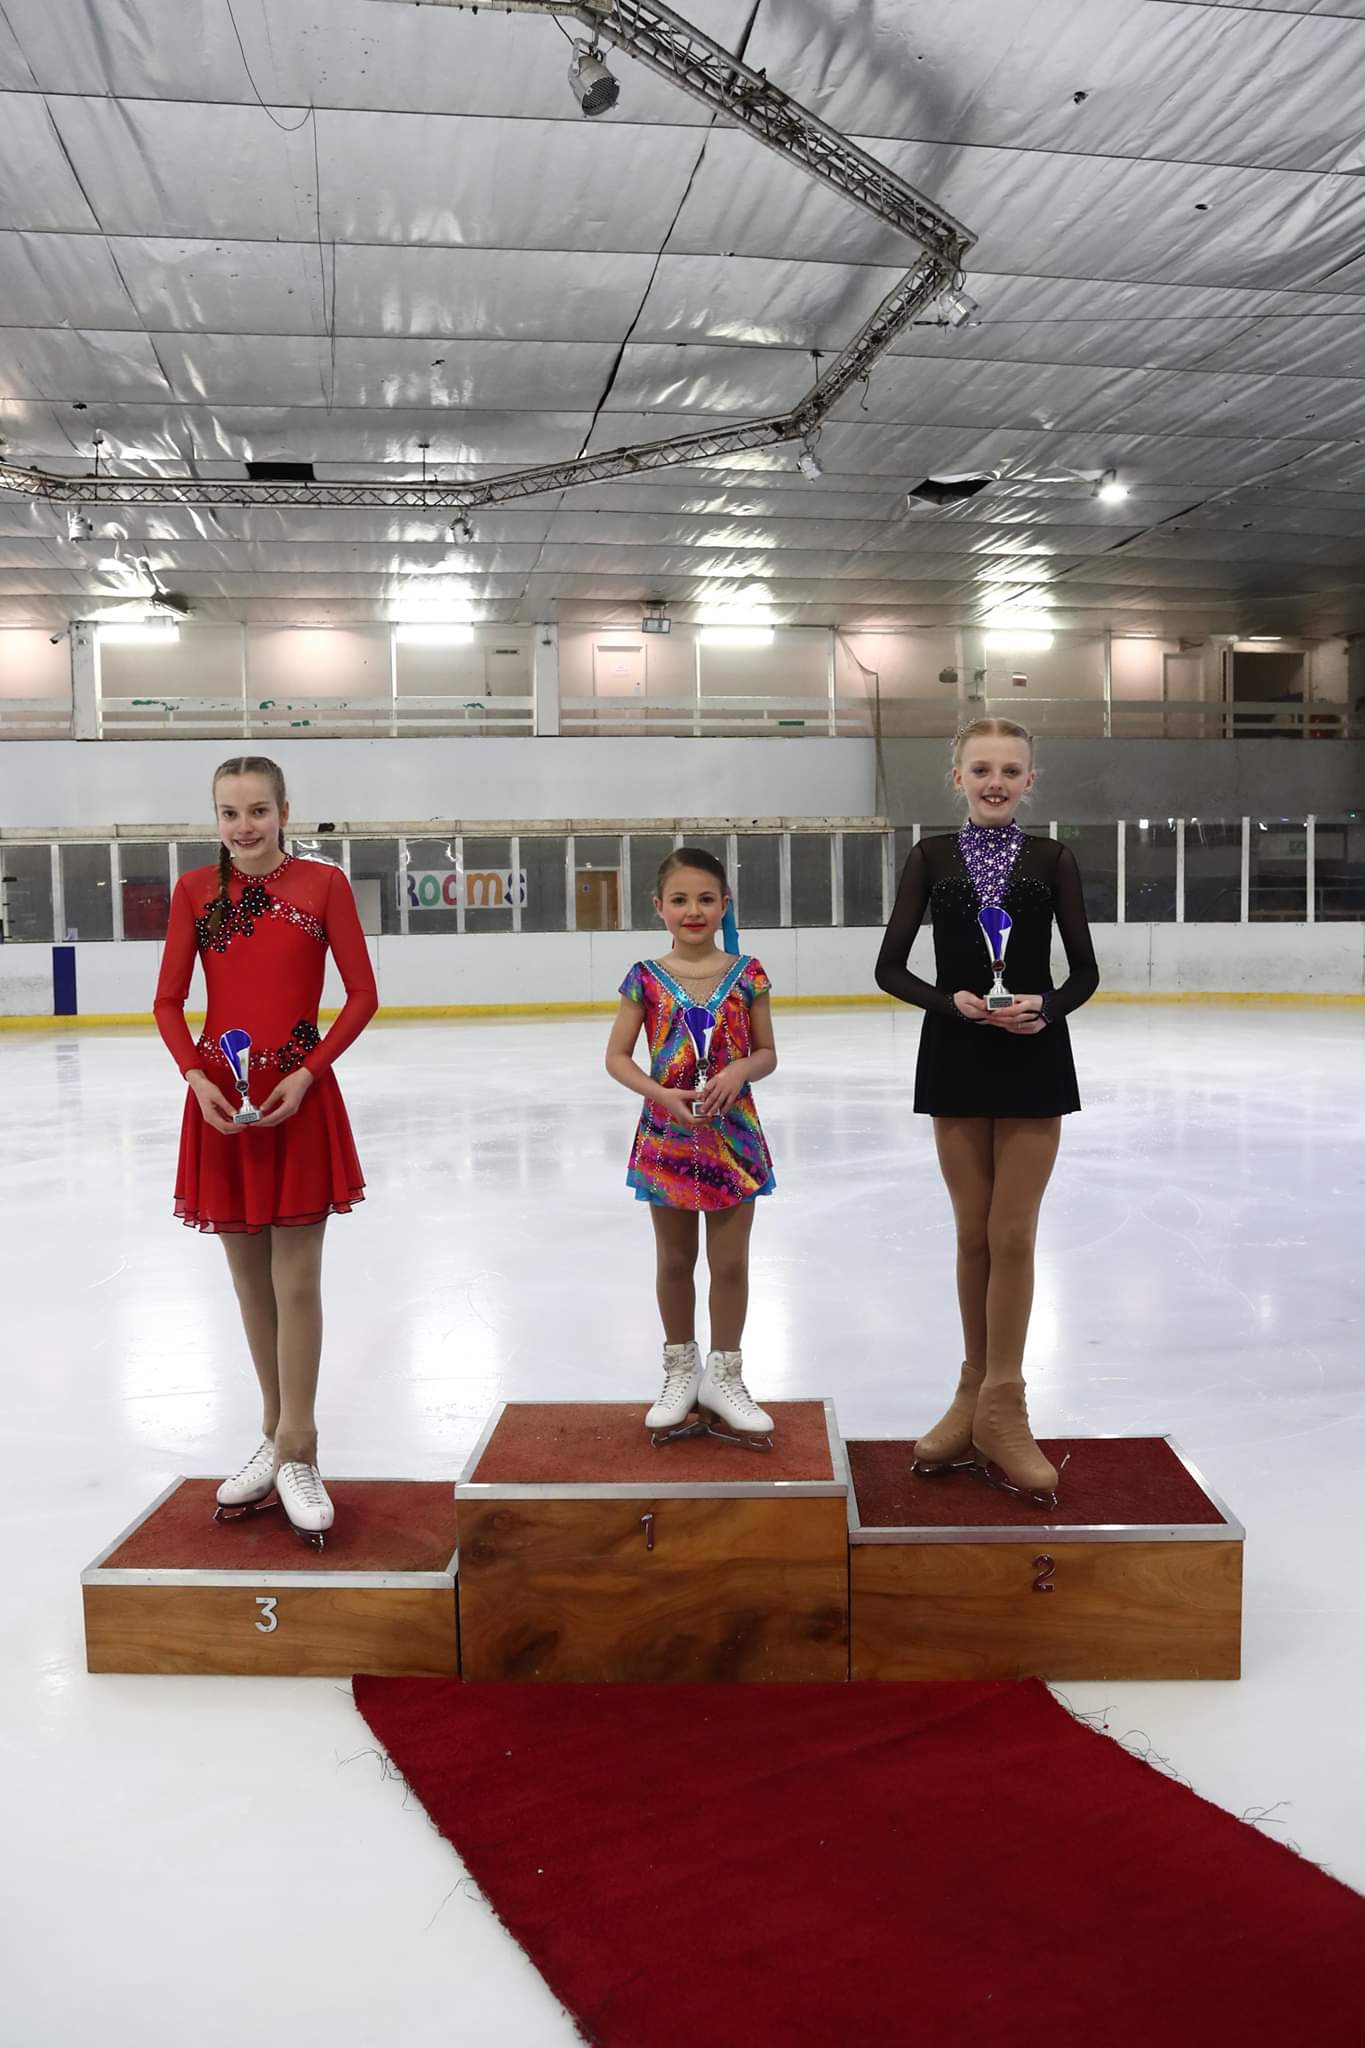 Ice skater Lily Grace Walding in first place